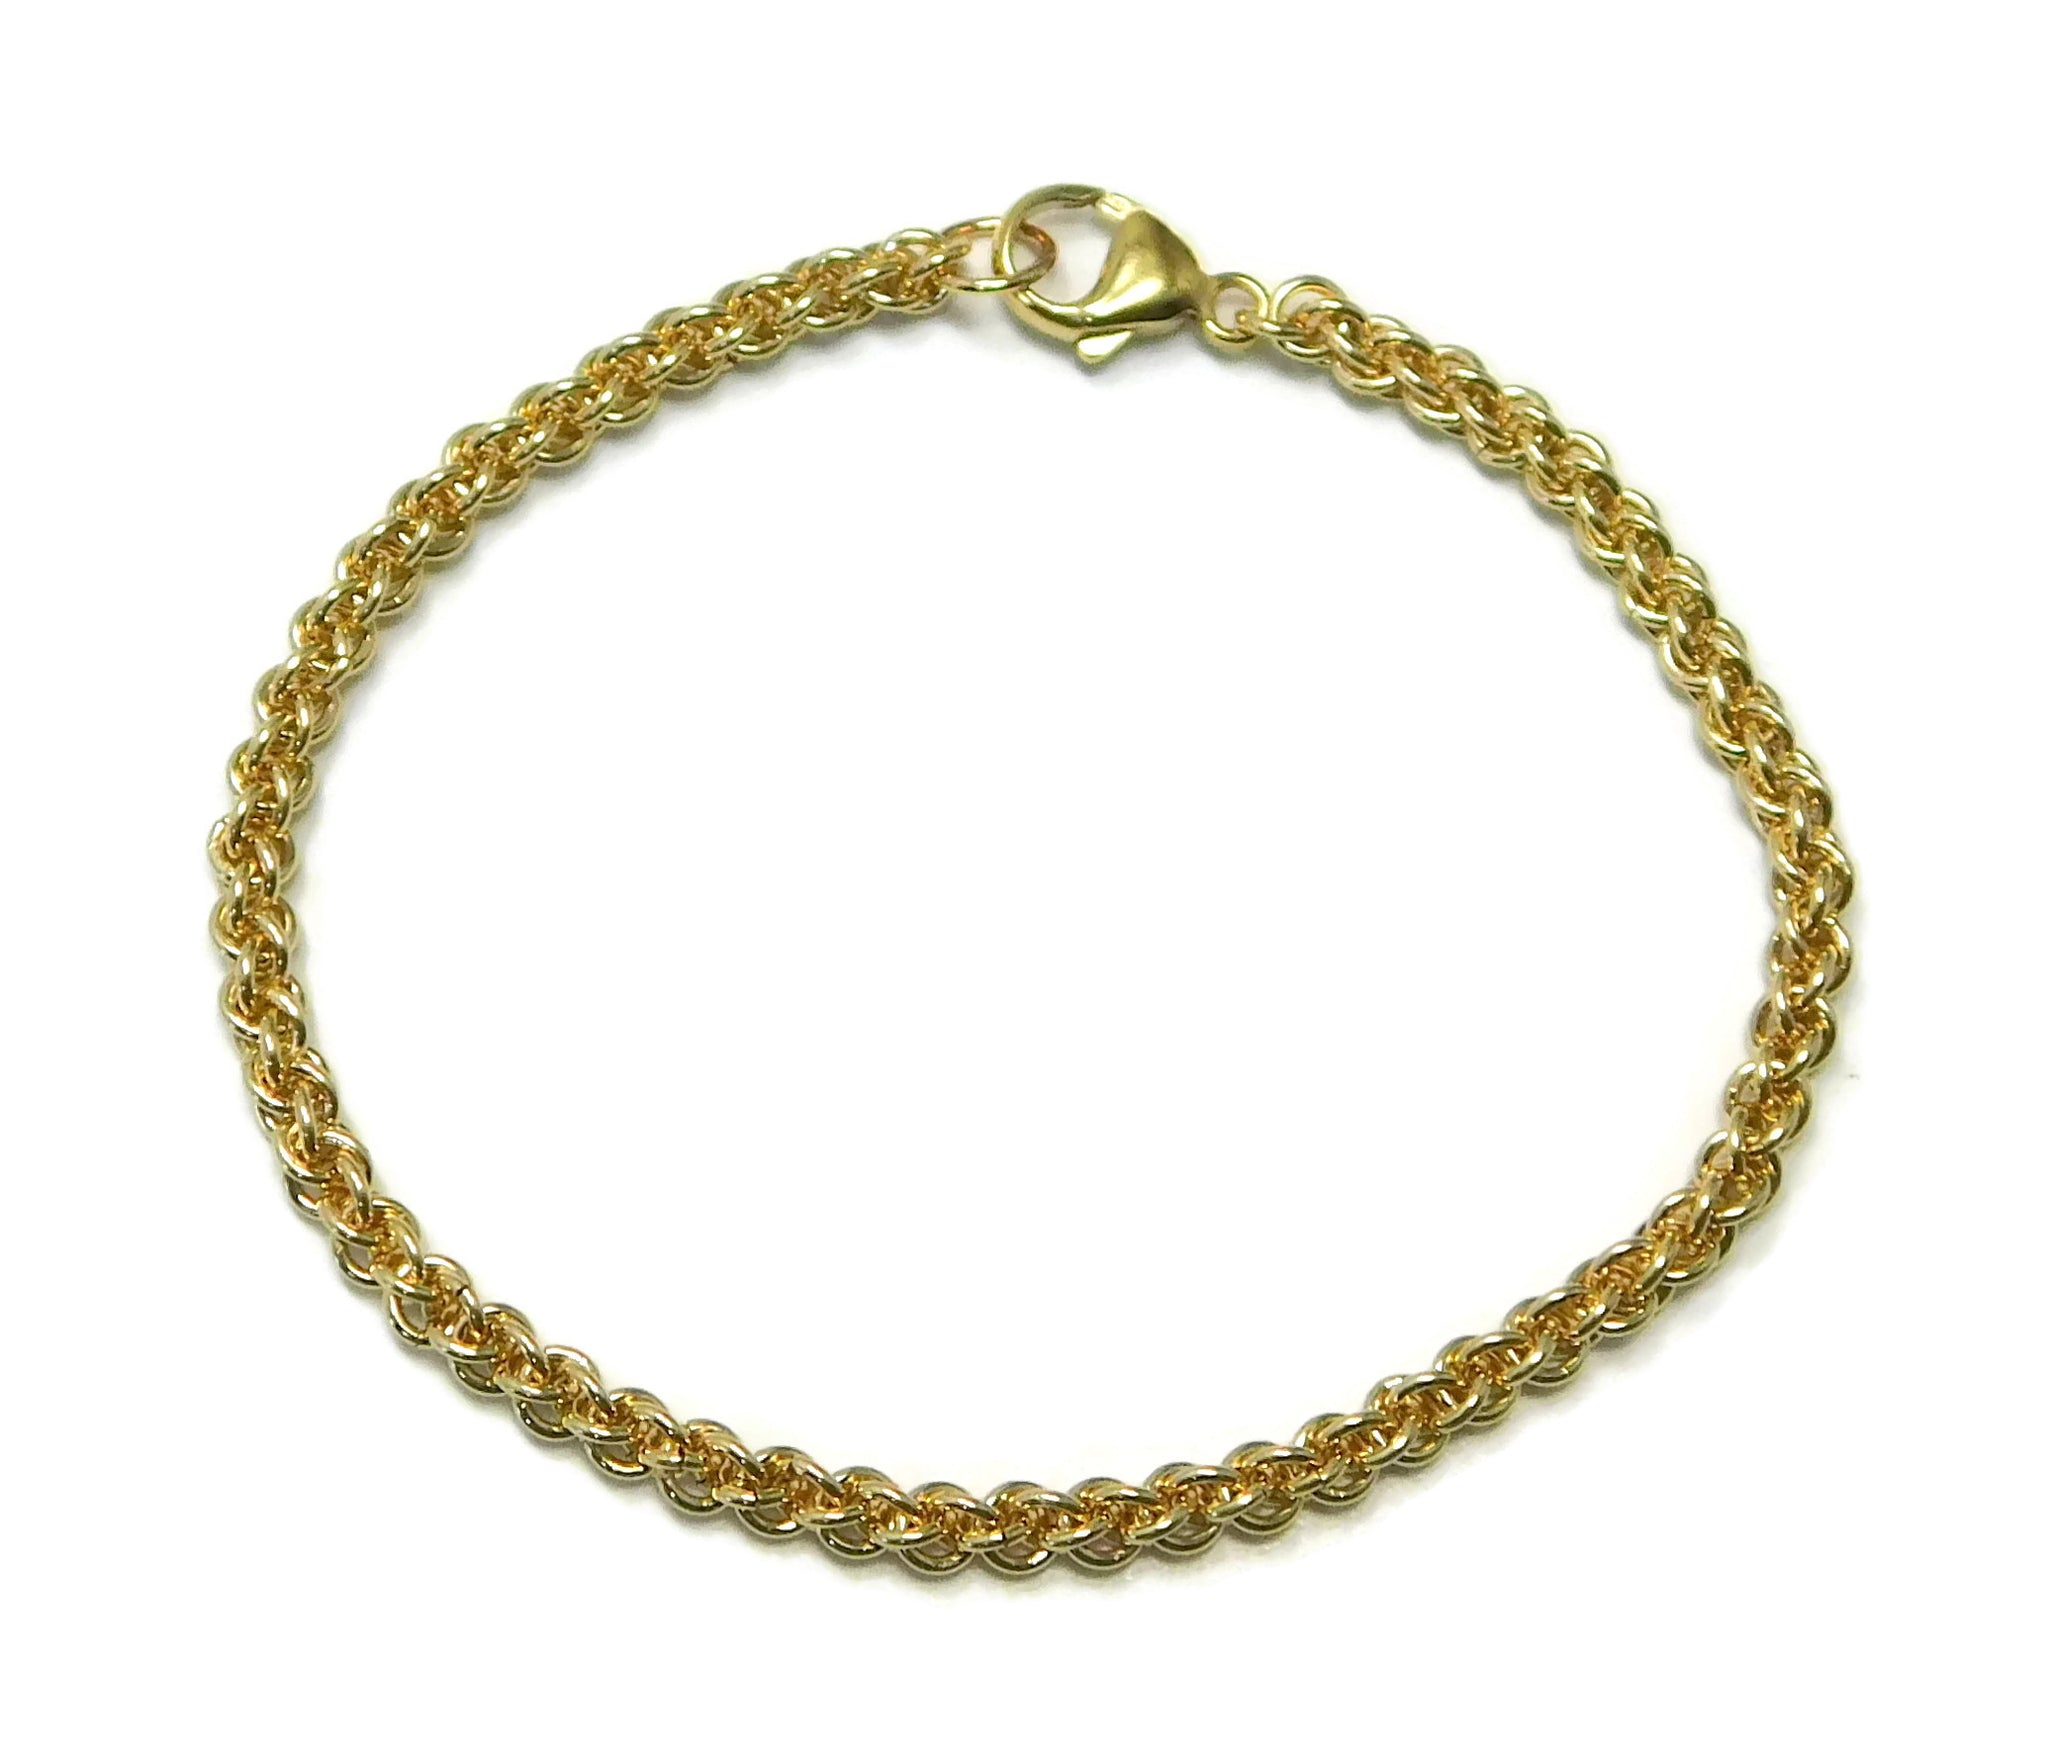 16g Jens Pind Bracelet Chainmaille Kit in Gold Fill - Etsy